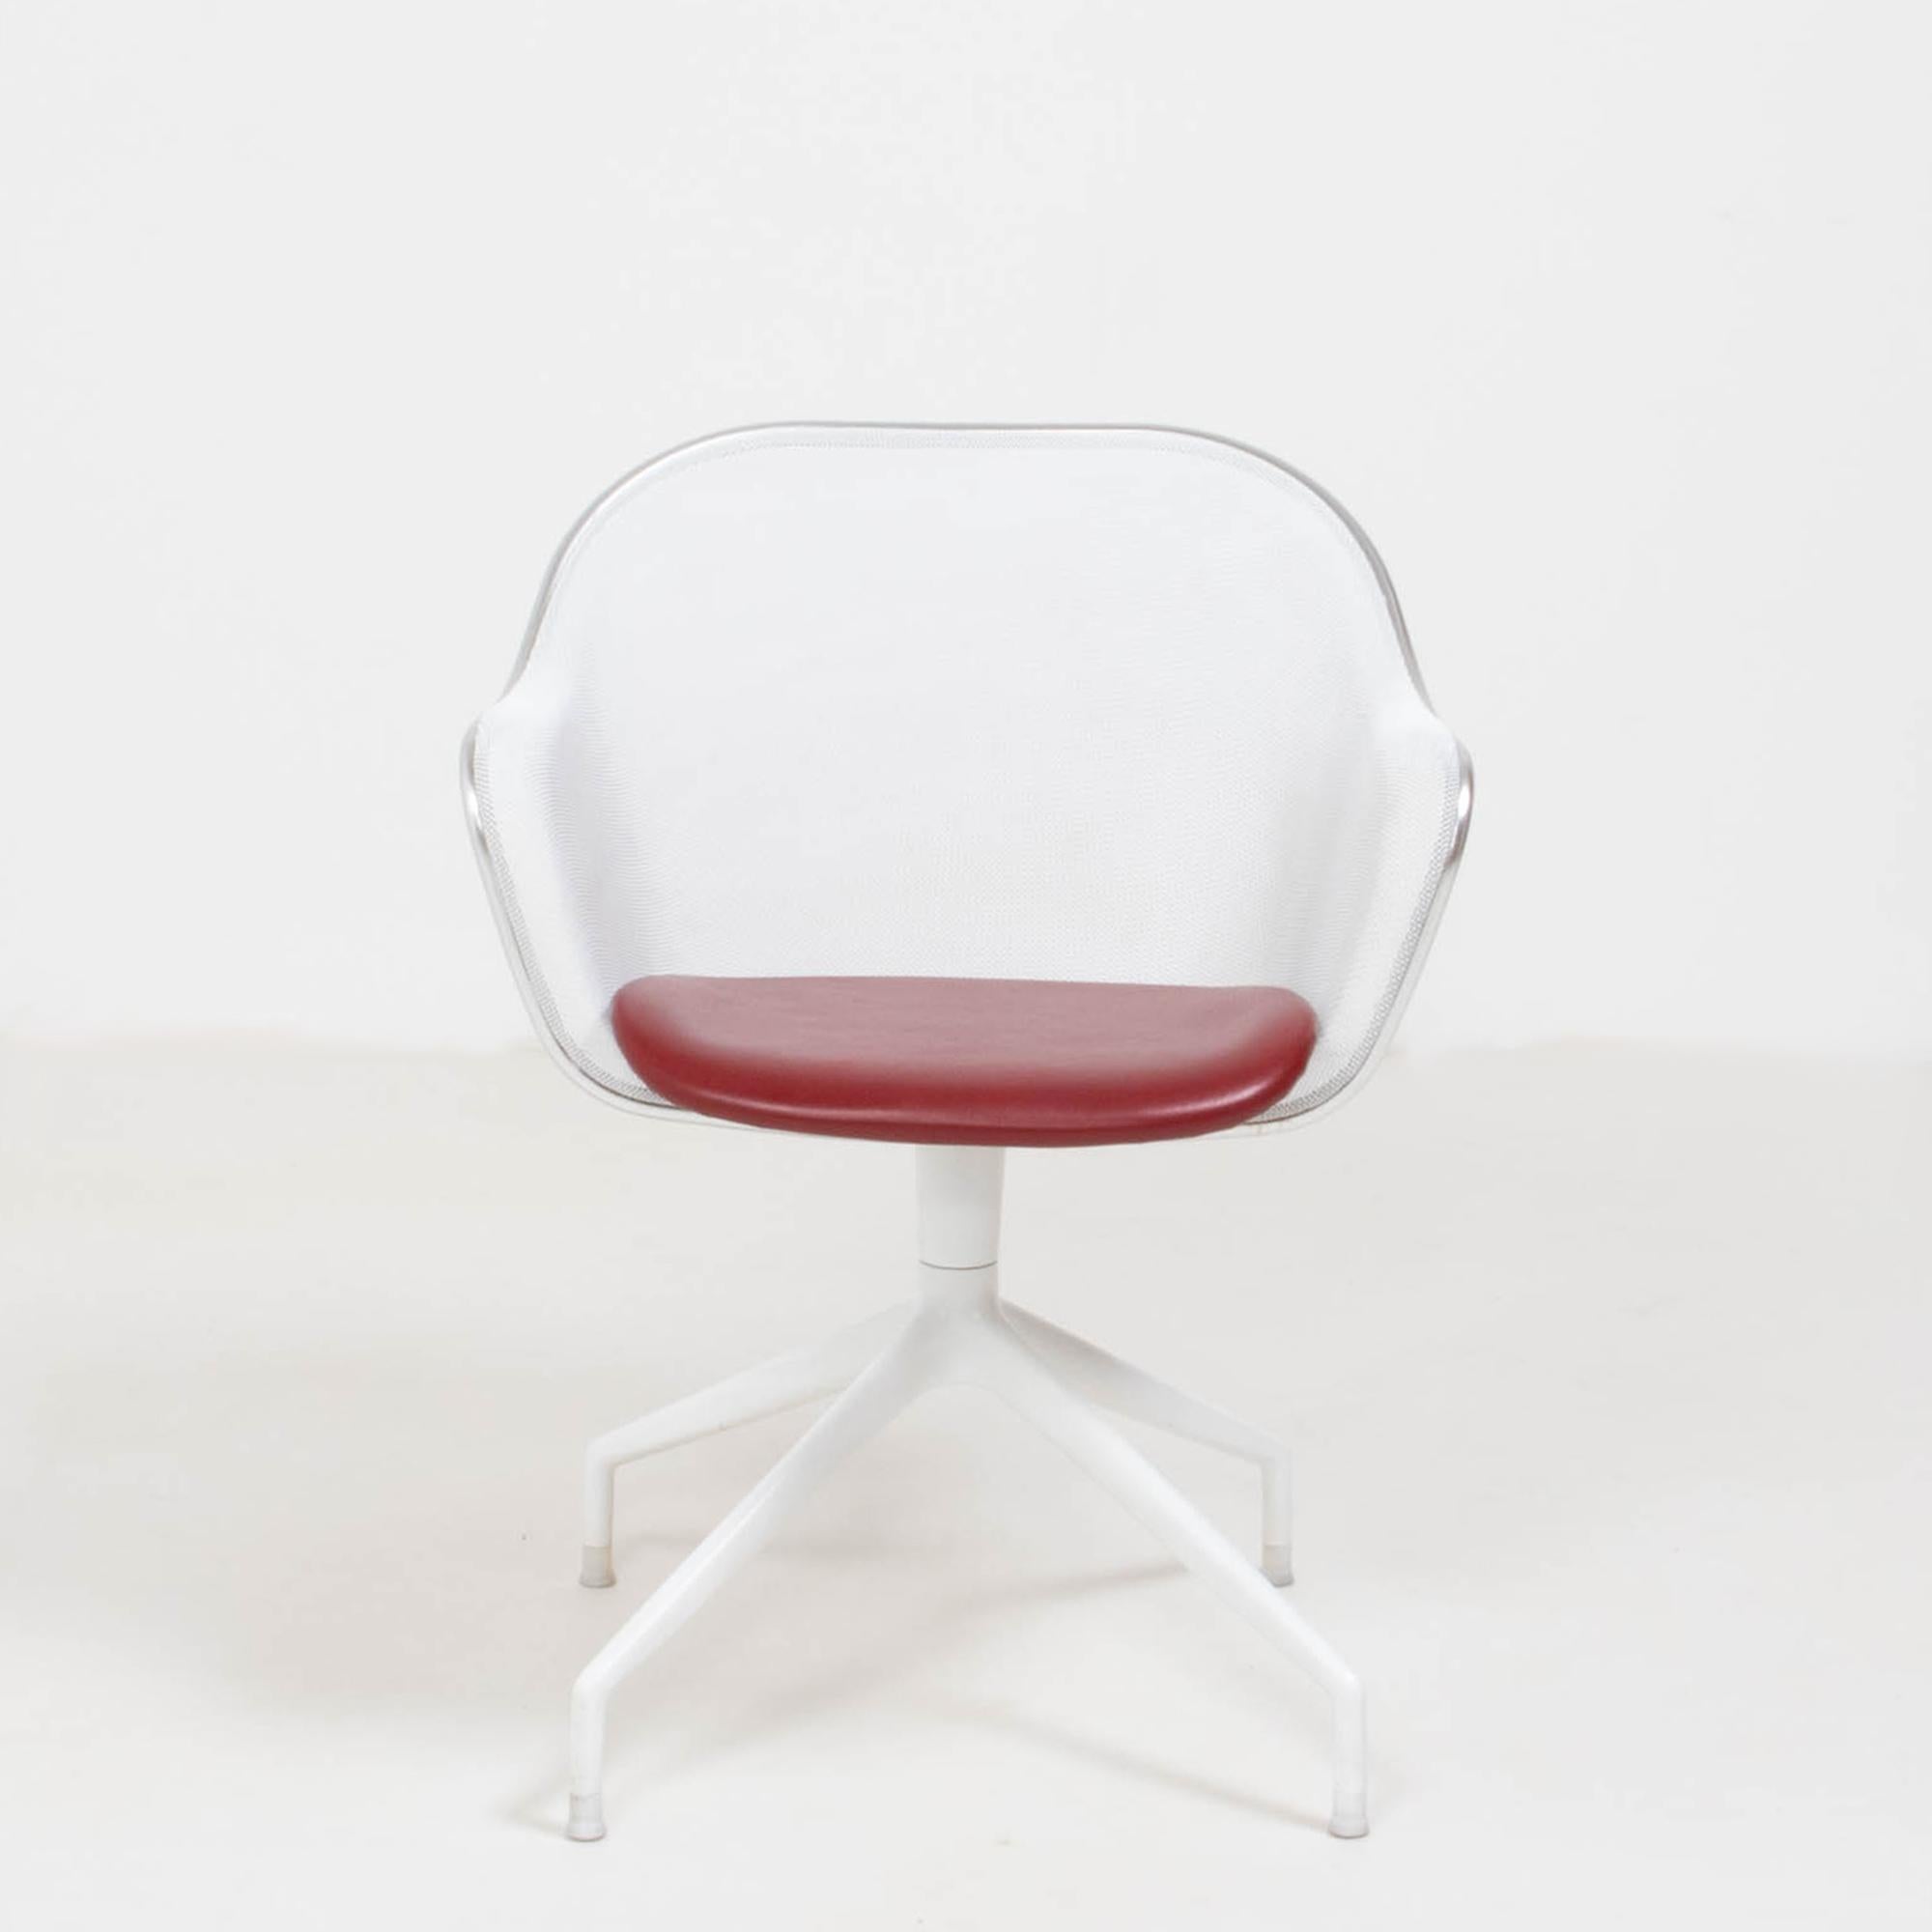 Contemporary B&B Italia by Antonio Citterio Luta White and Red Leather Swivel Dining Chairs For Sale